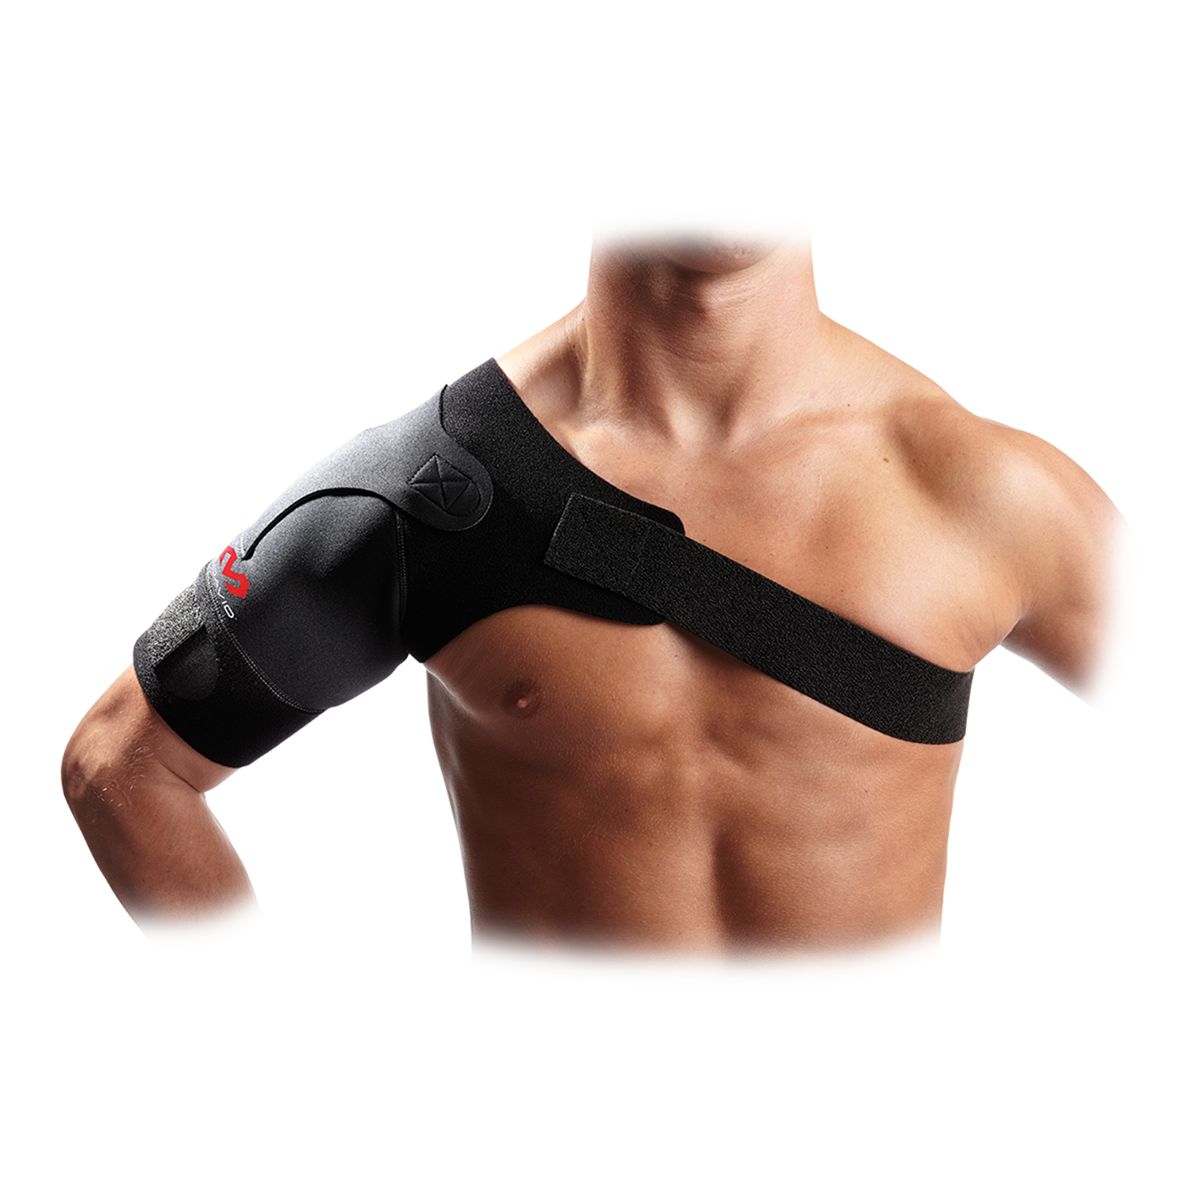 MuscoFx Adjustable Orthopedic Shoulder Support Brace, Shoulder Compression  Sleeve That Provides Ice Pack Relief for Shoulder Pain, and Great Support  for Fast Healing! - Vysta Health